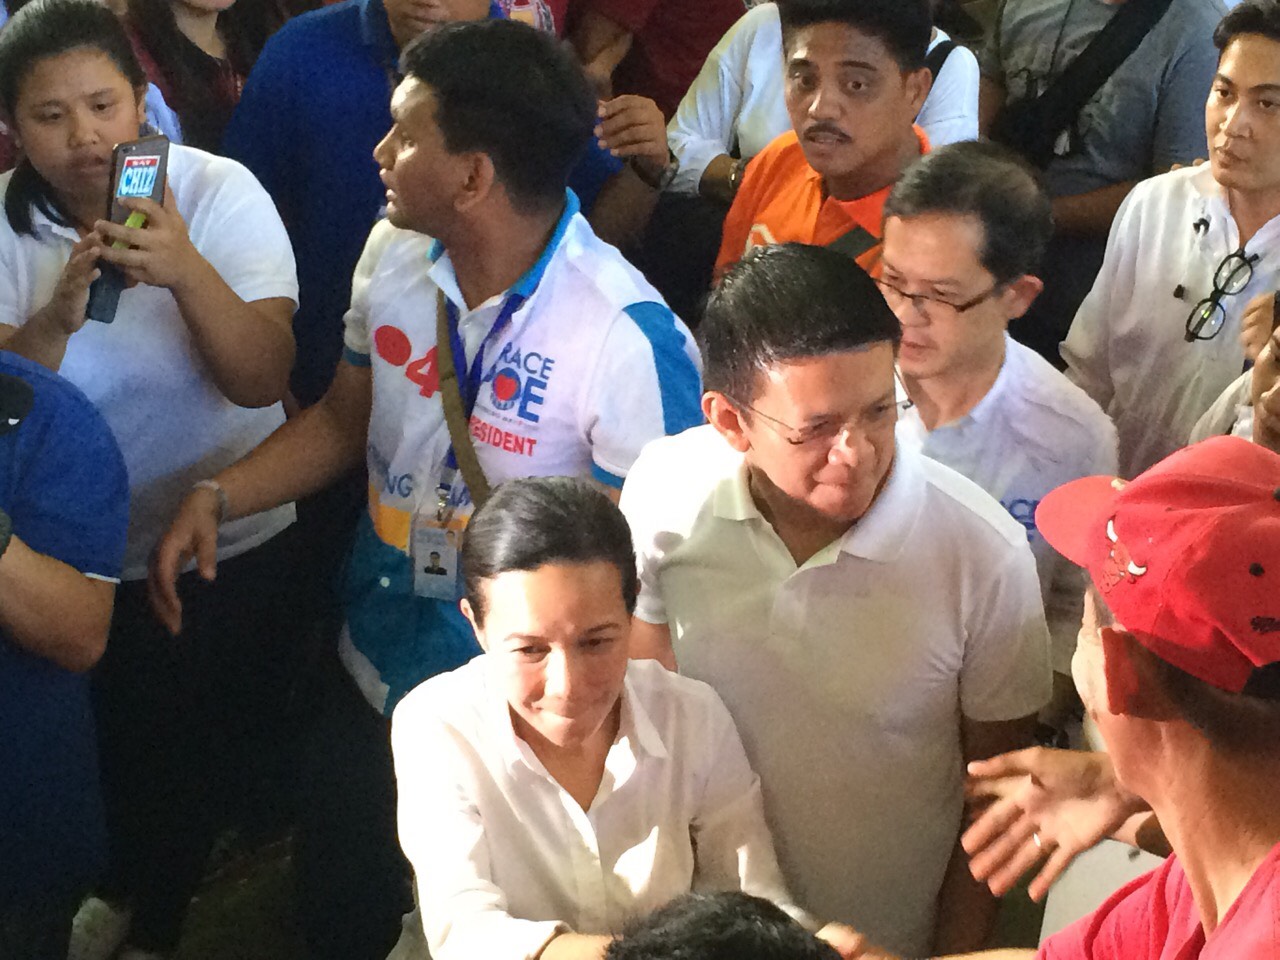 COJUANGCO CONNECTION. Presidential candidate Grace Poe and her running mate Francis Escudero are asked about their connection to businessman Eduardo 'Danding' Cojuangco Jr, during their sortie in Quezon province, where many beneficiaries of the coconut levy fund reside. Photo by Camille Elemia/Rappler 